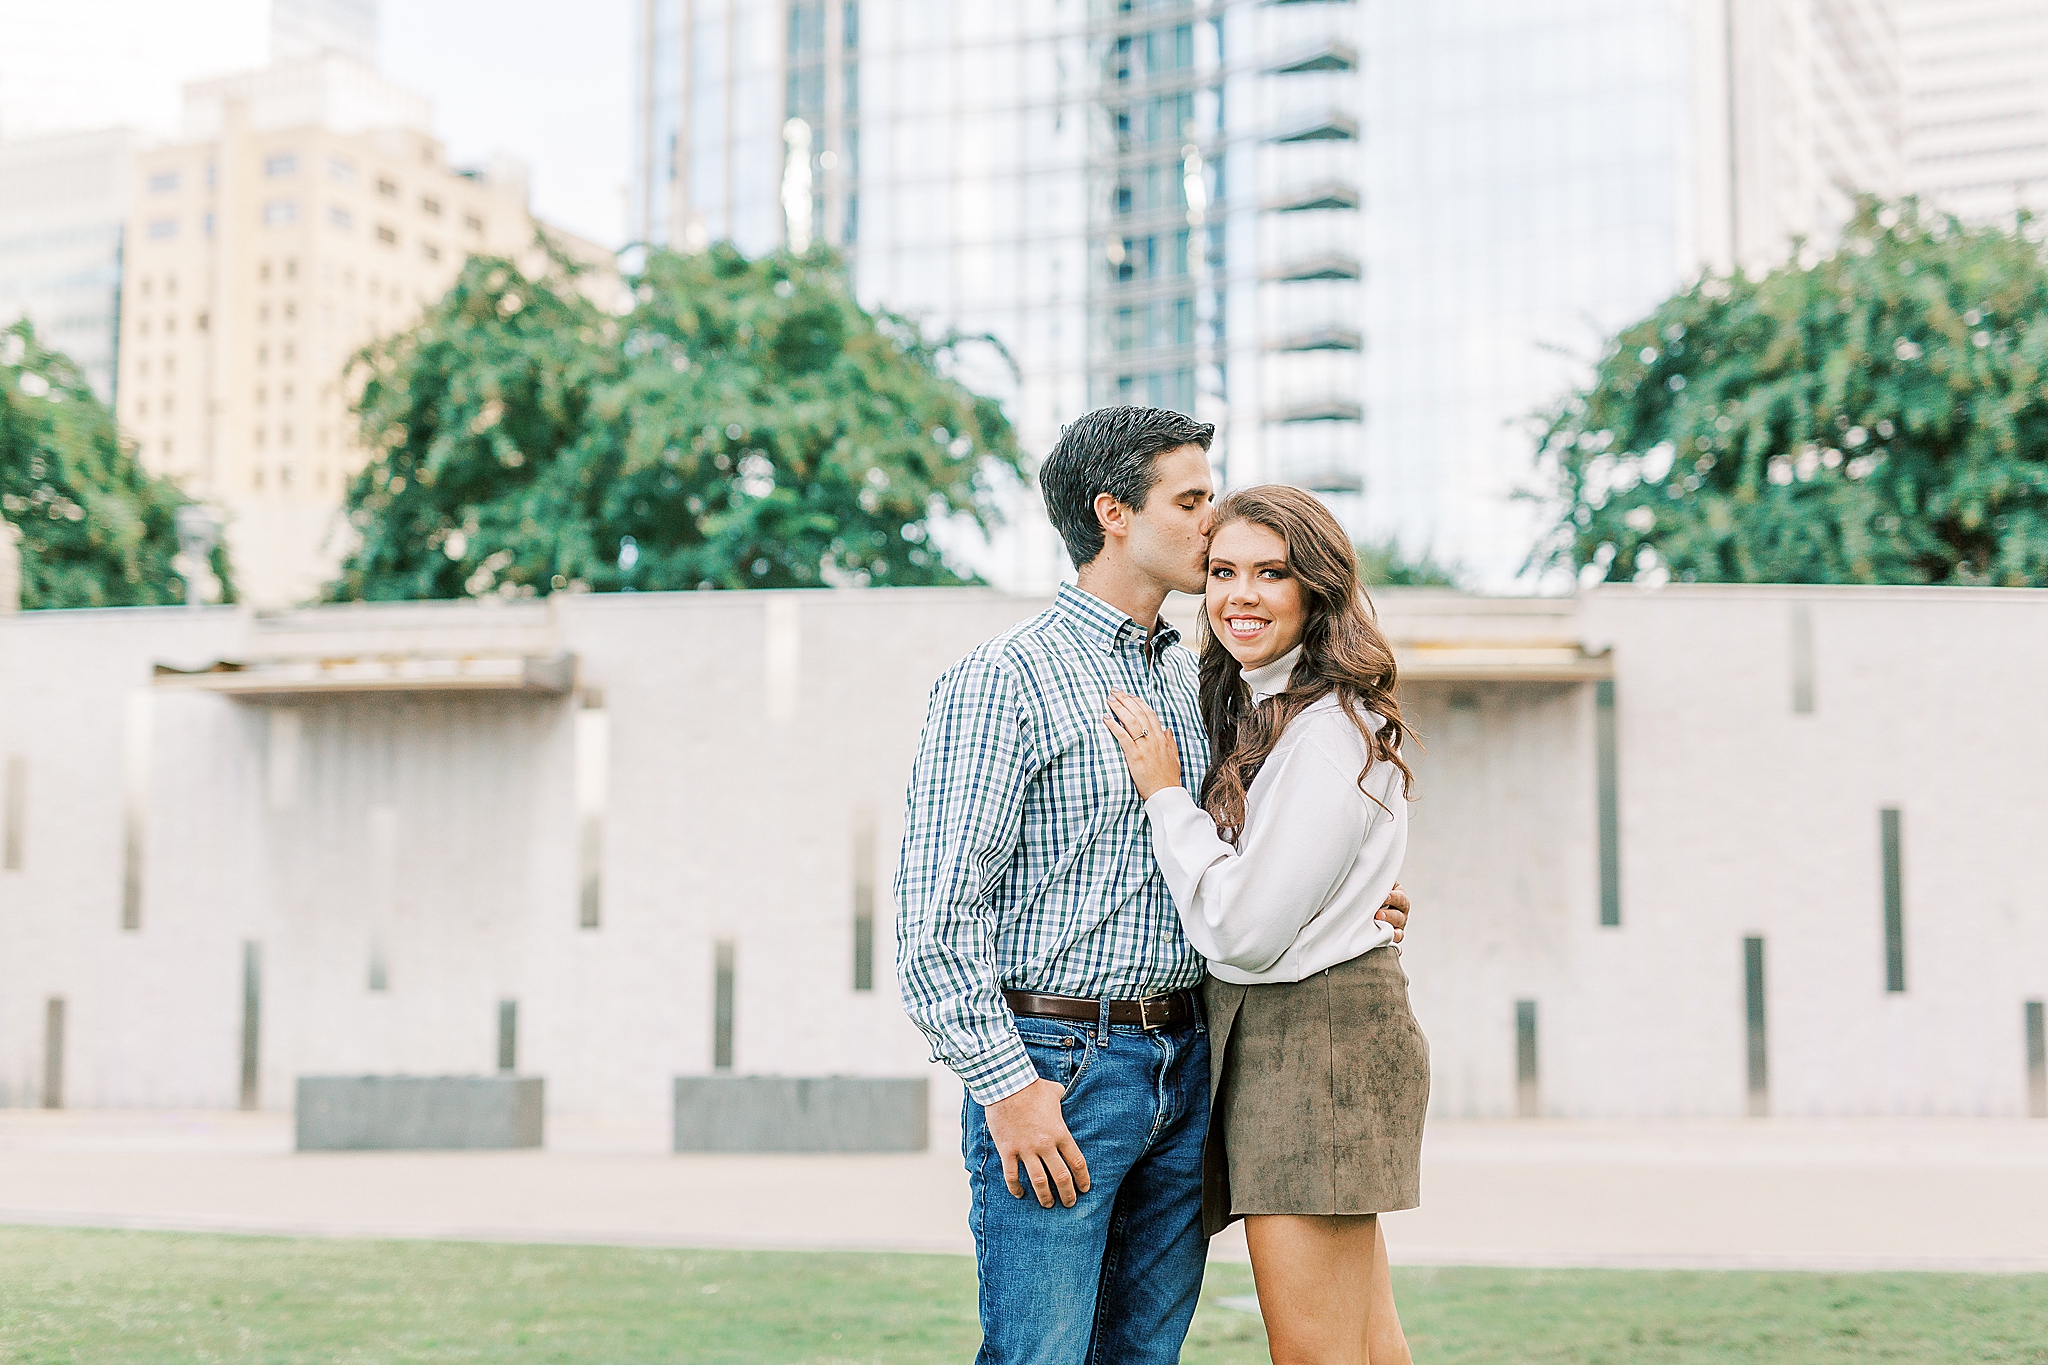 engagement portraits in city center with Charlotte photographer